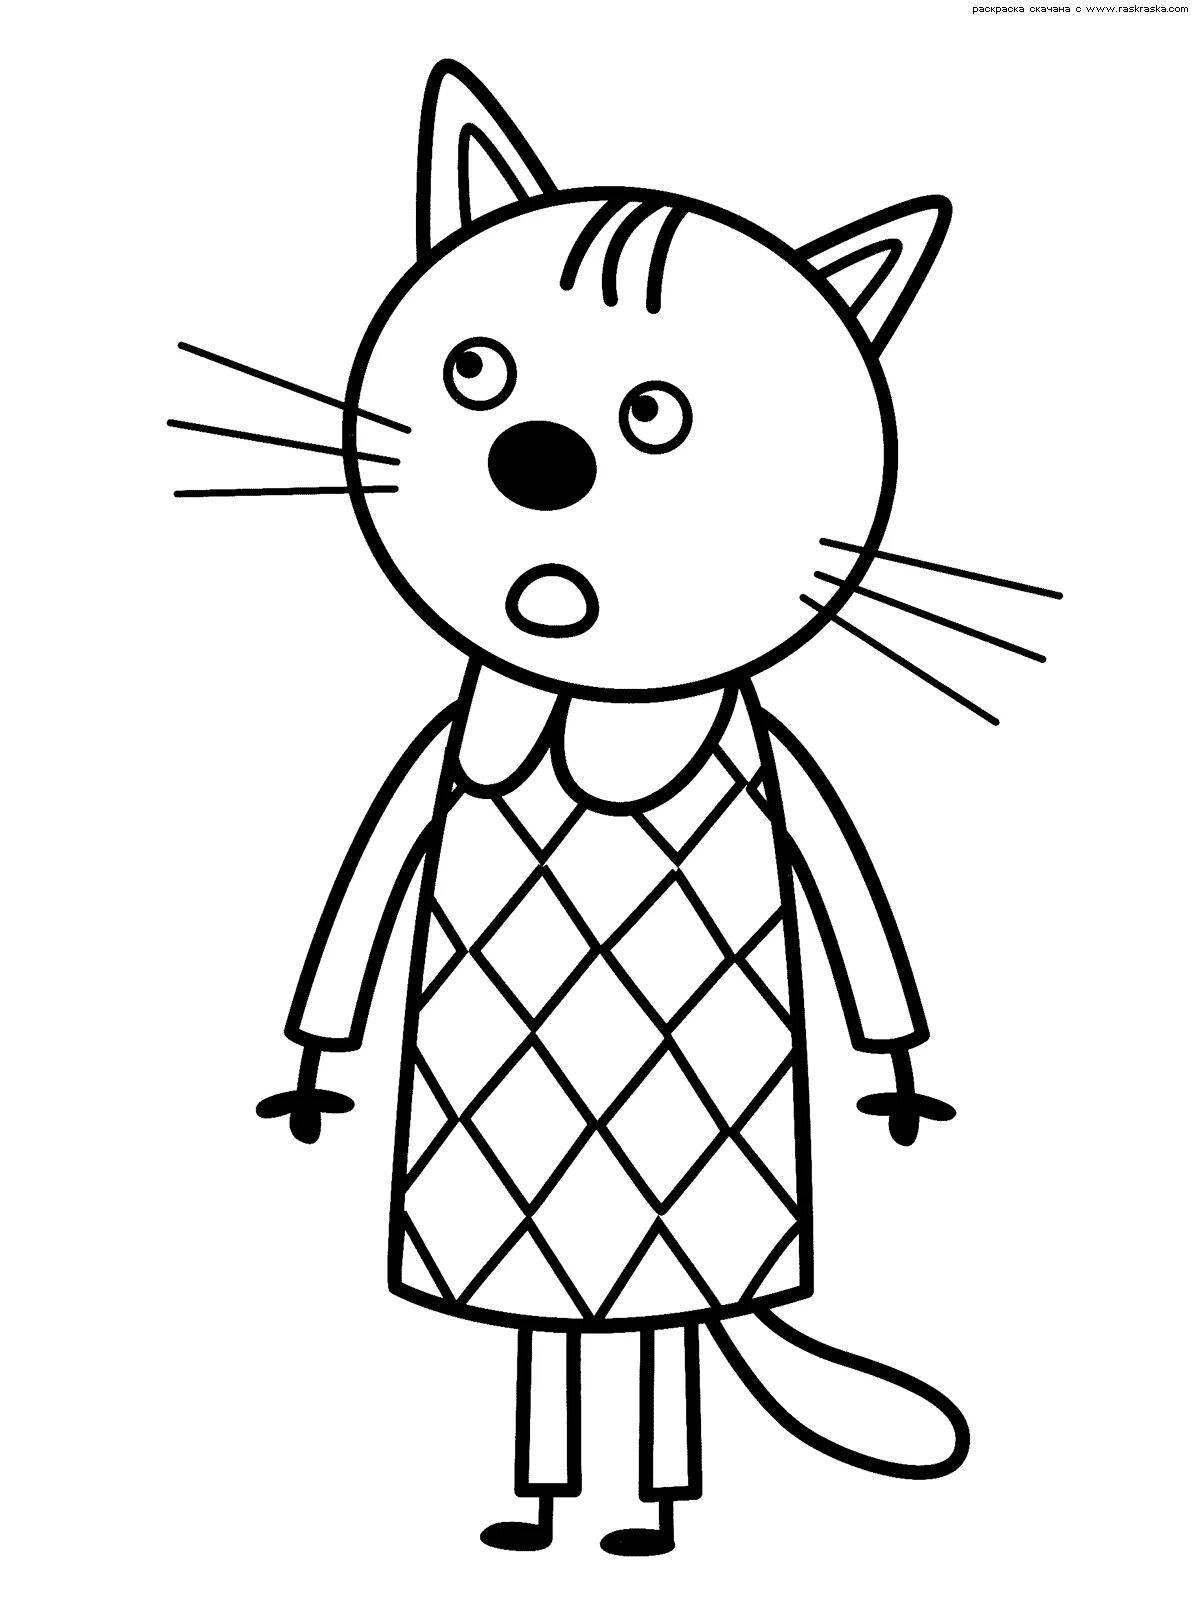 Coloring page adorable three cats